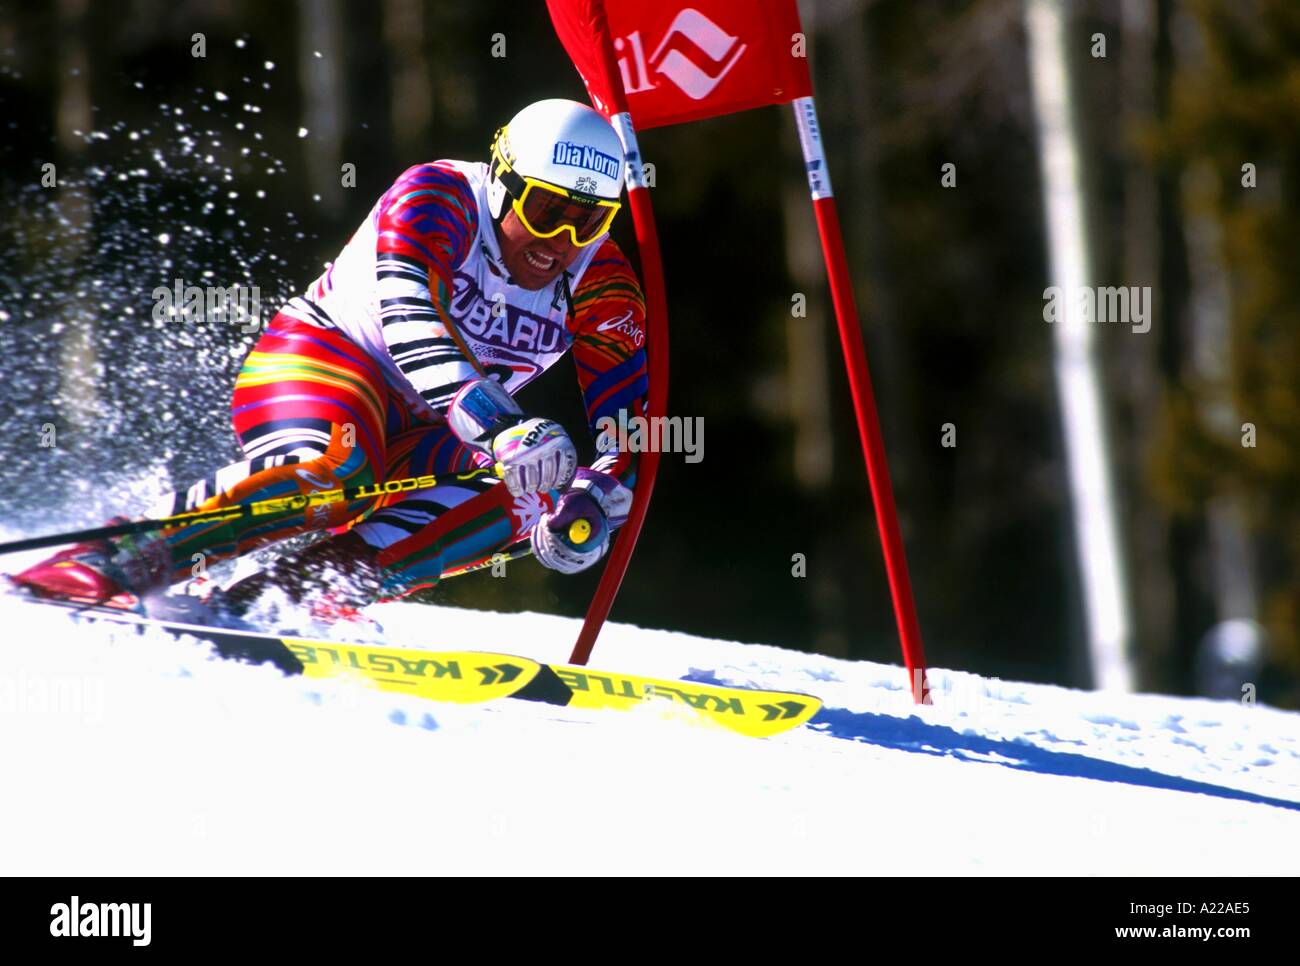 Ski racer Bernhard Gstrein carving at speed during giant slalom race at the 1991 World Cup Vail USA I Tomlinson Stock Photo